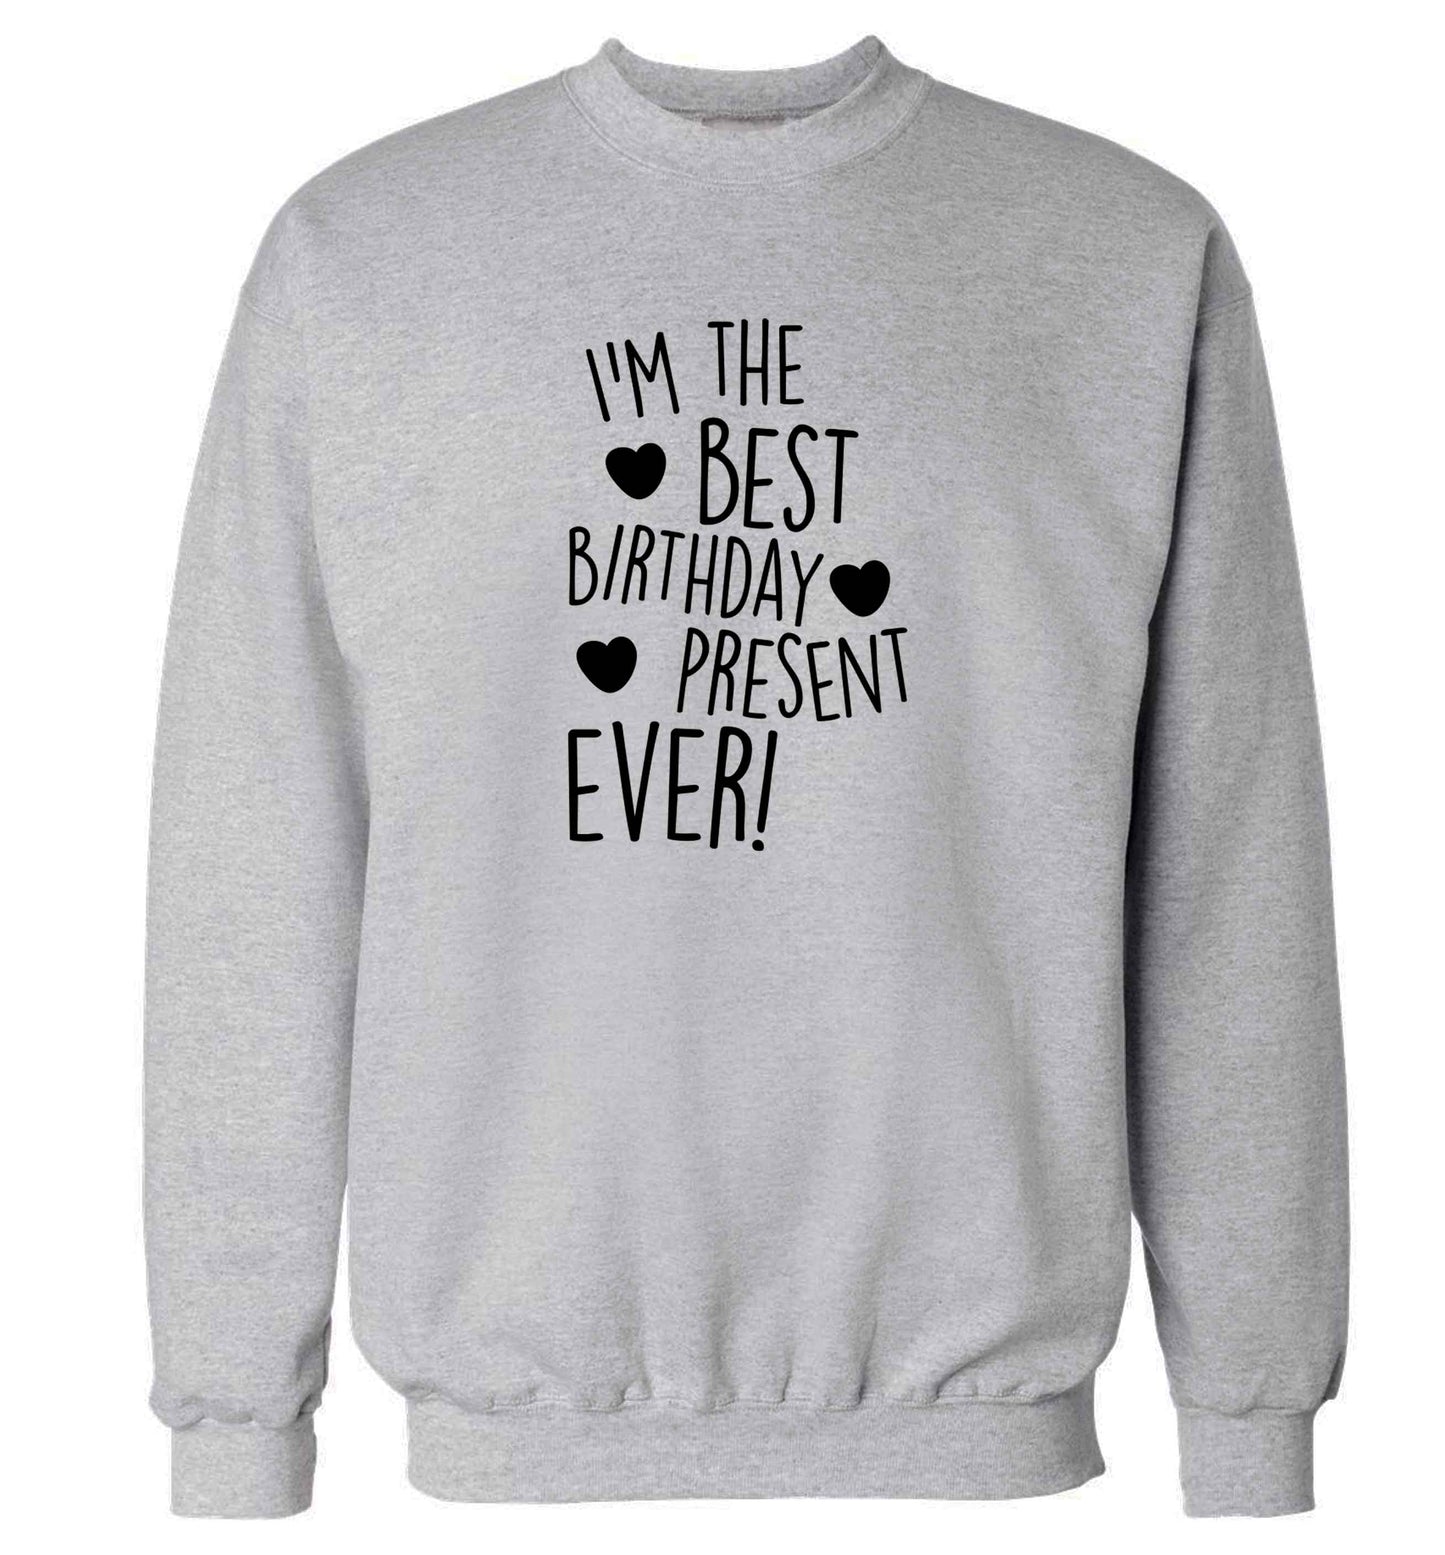 I'm the best birthday present ever adult's unisex grey sweater 2XL